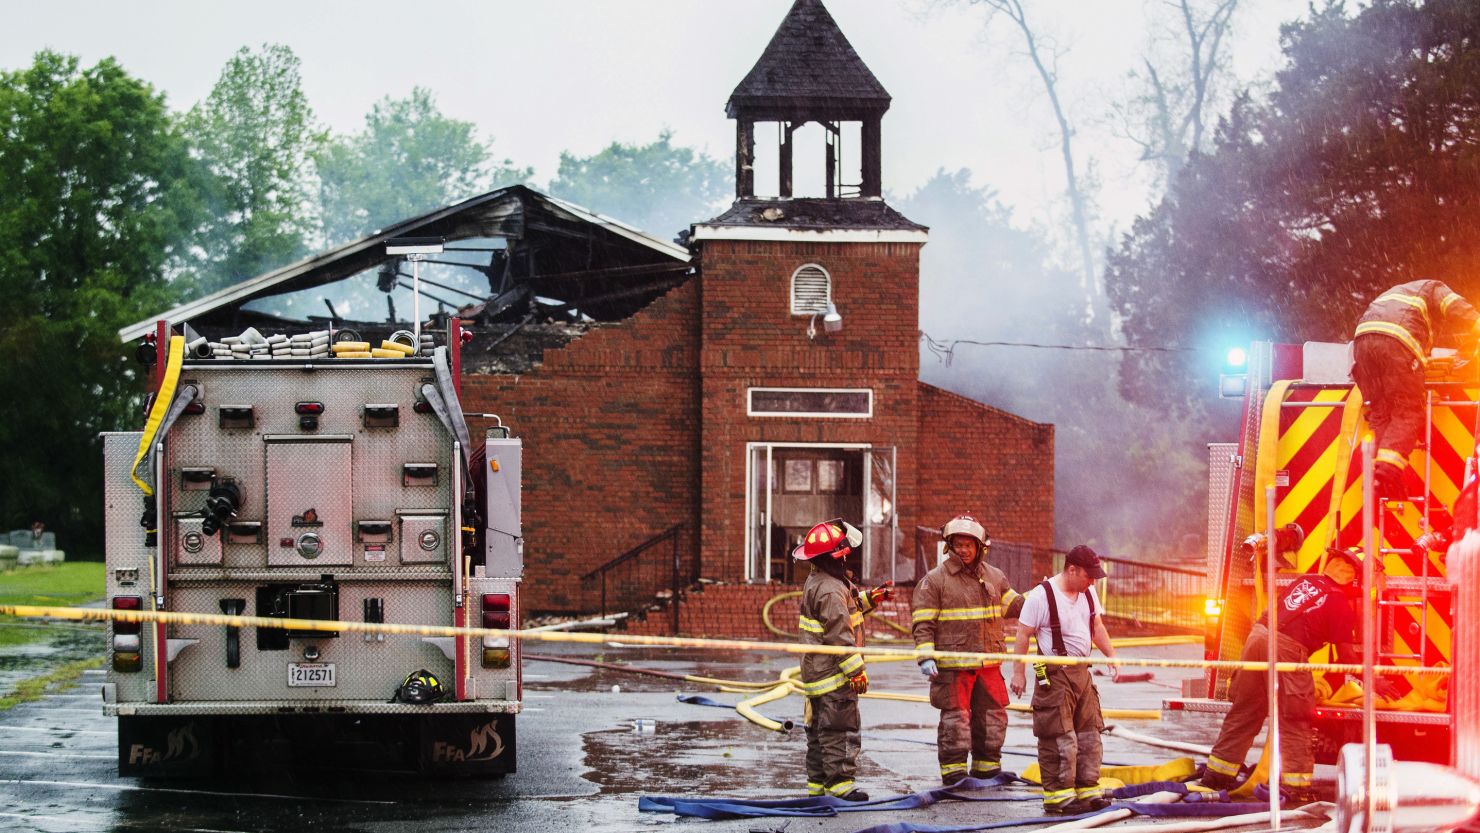 Firefighters respond to a fire at Mount Pleasant Baptist Church on April 4 in Opelousas, Louisiana.